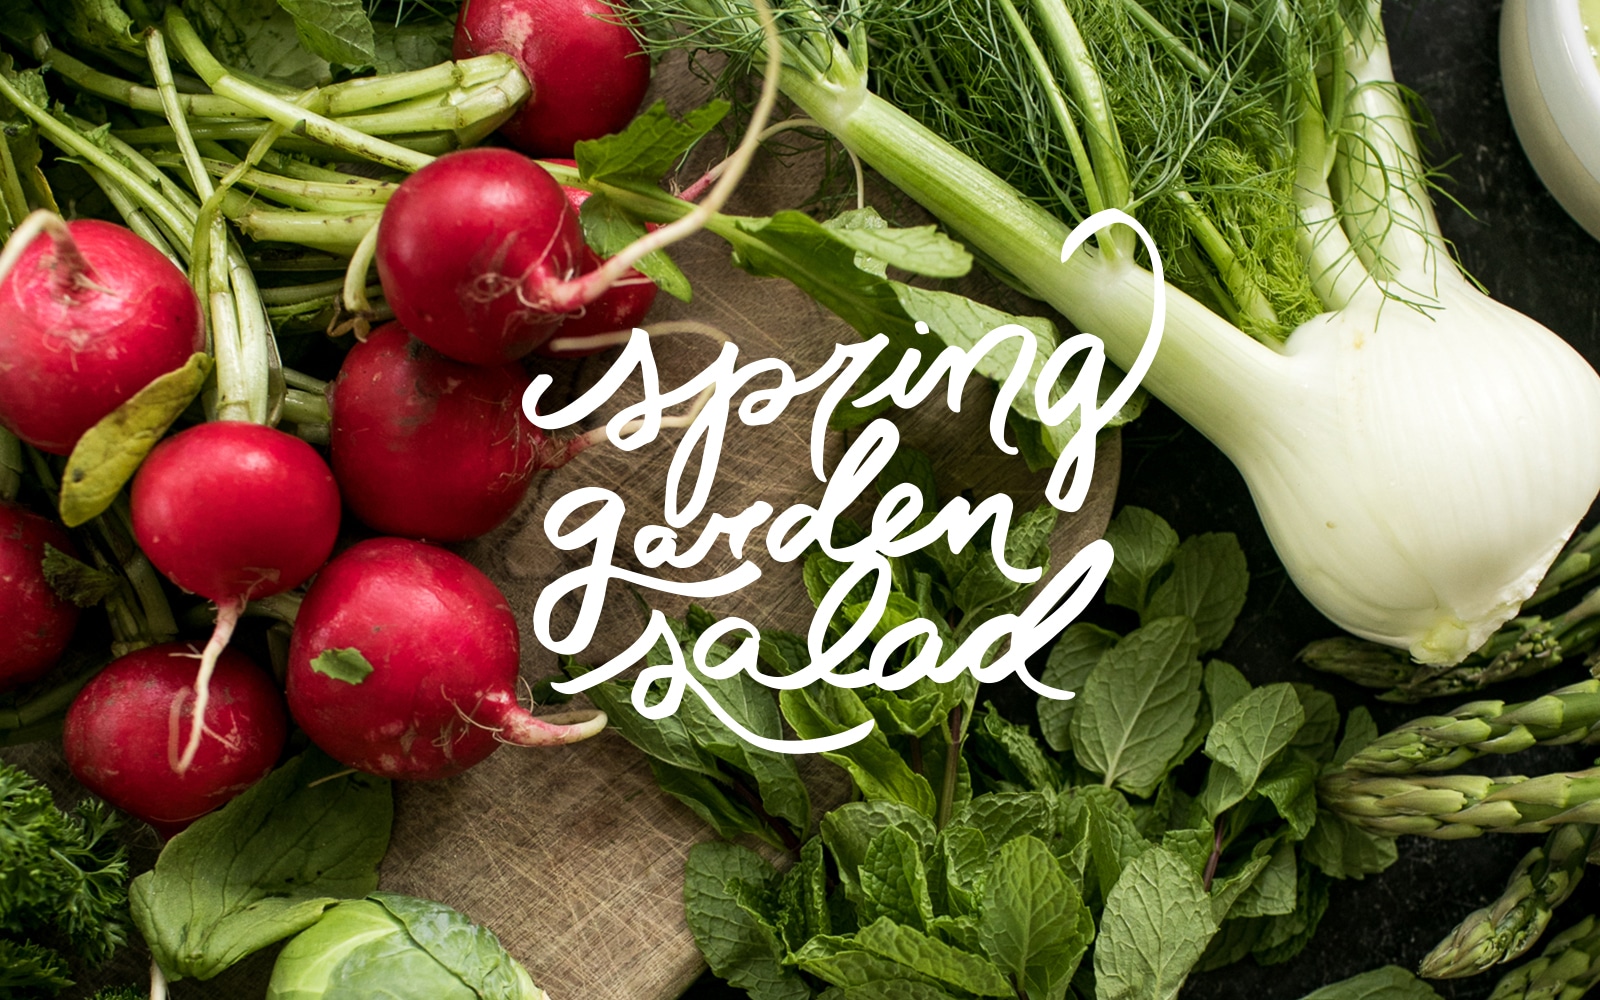 A Spring Garden Salad recipe perfect for a veggie dinner night in the spring. Get the recipe on The Fresh Exchange.